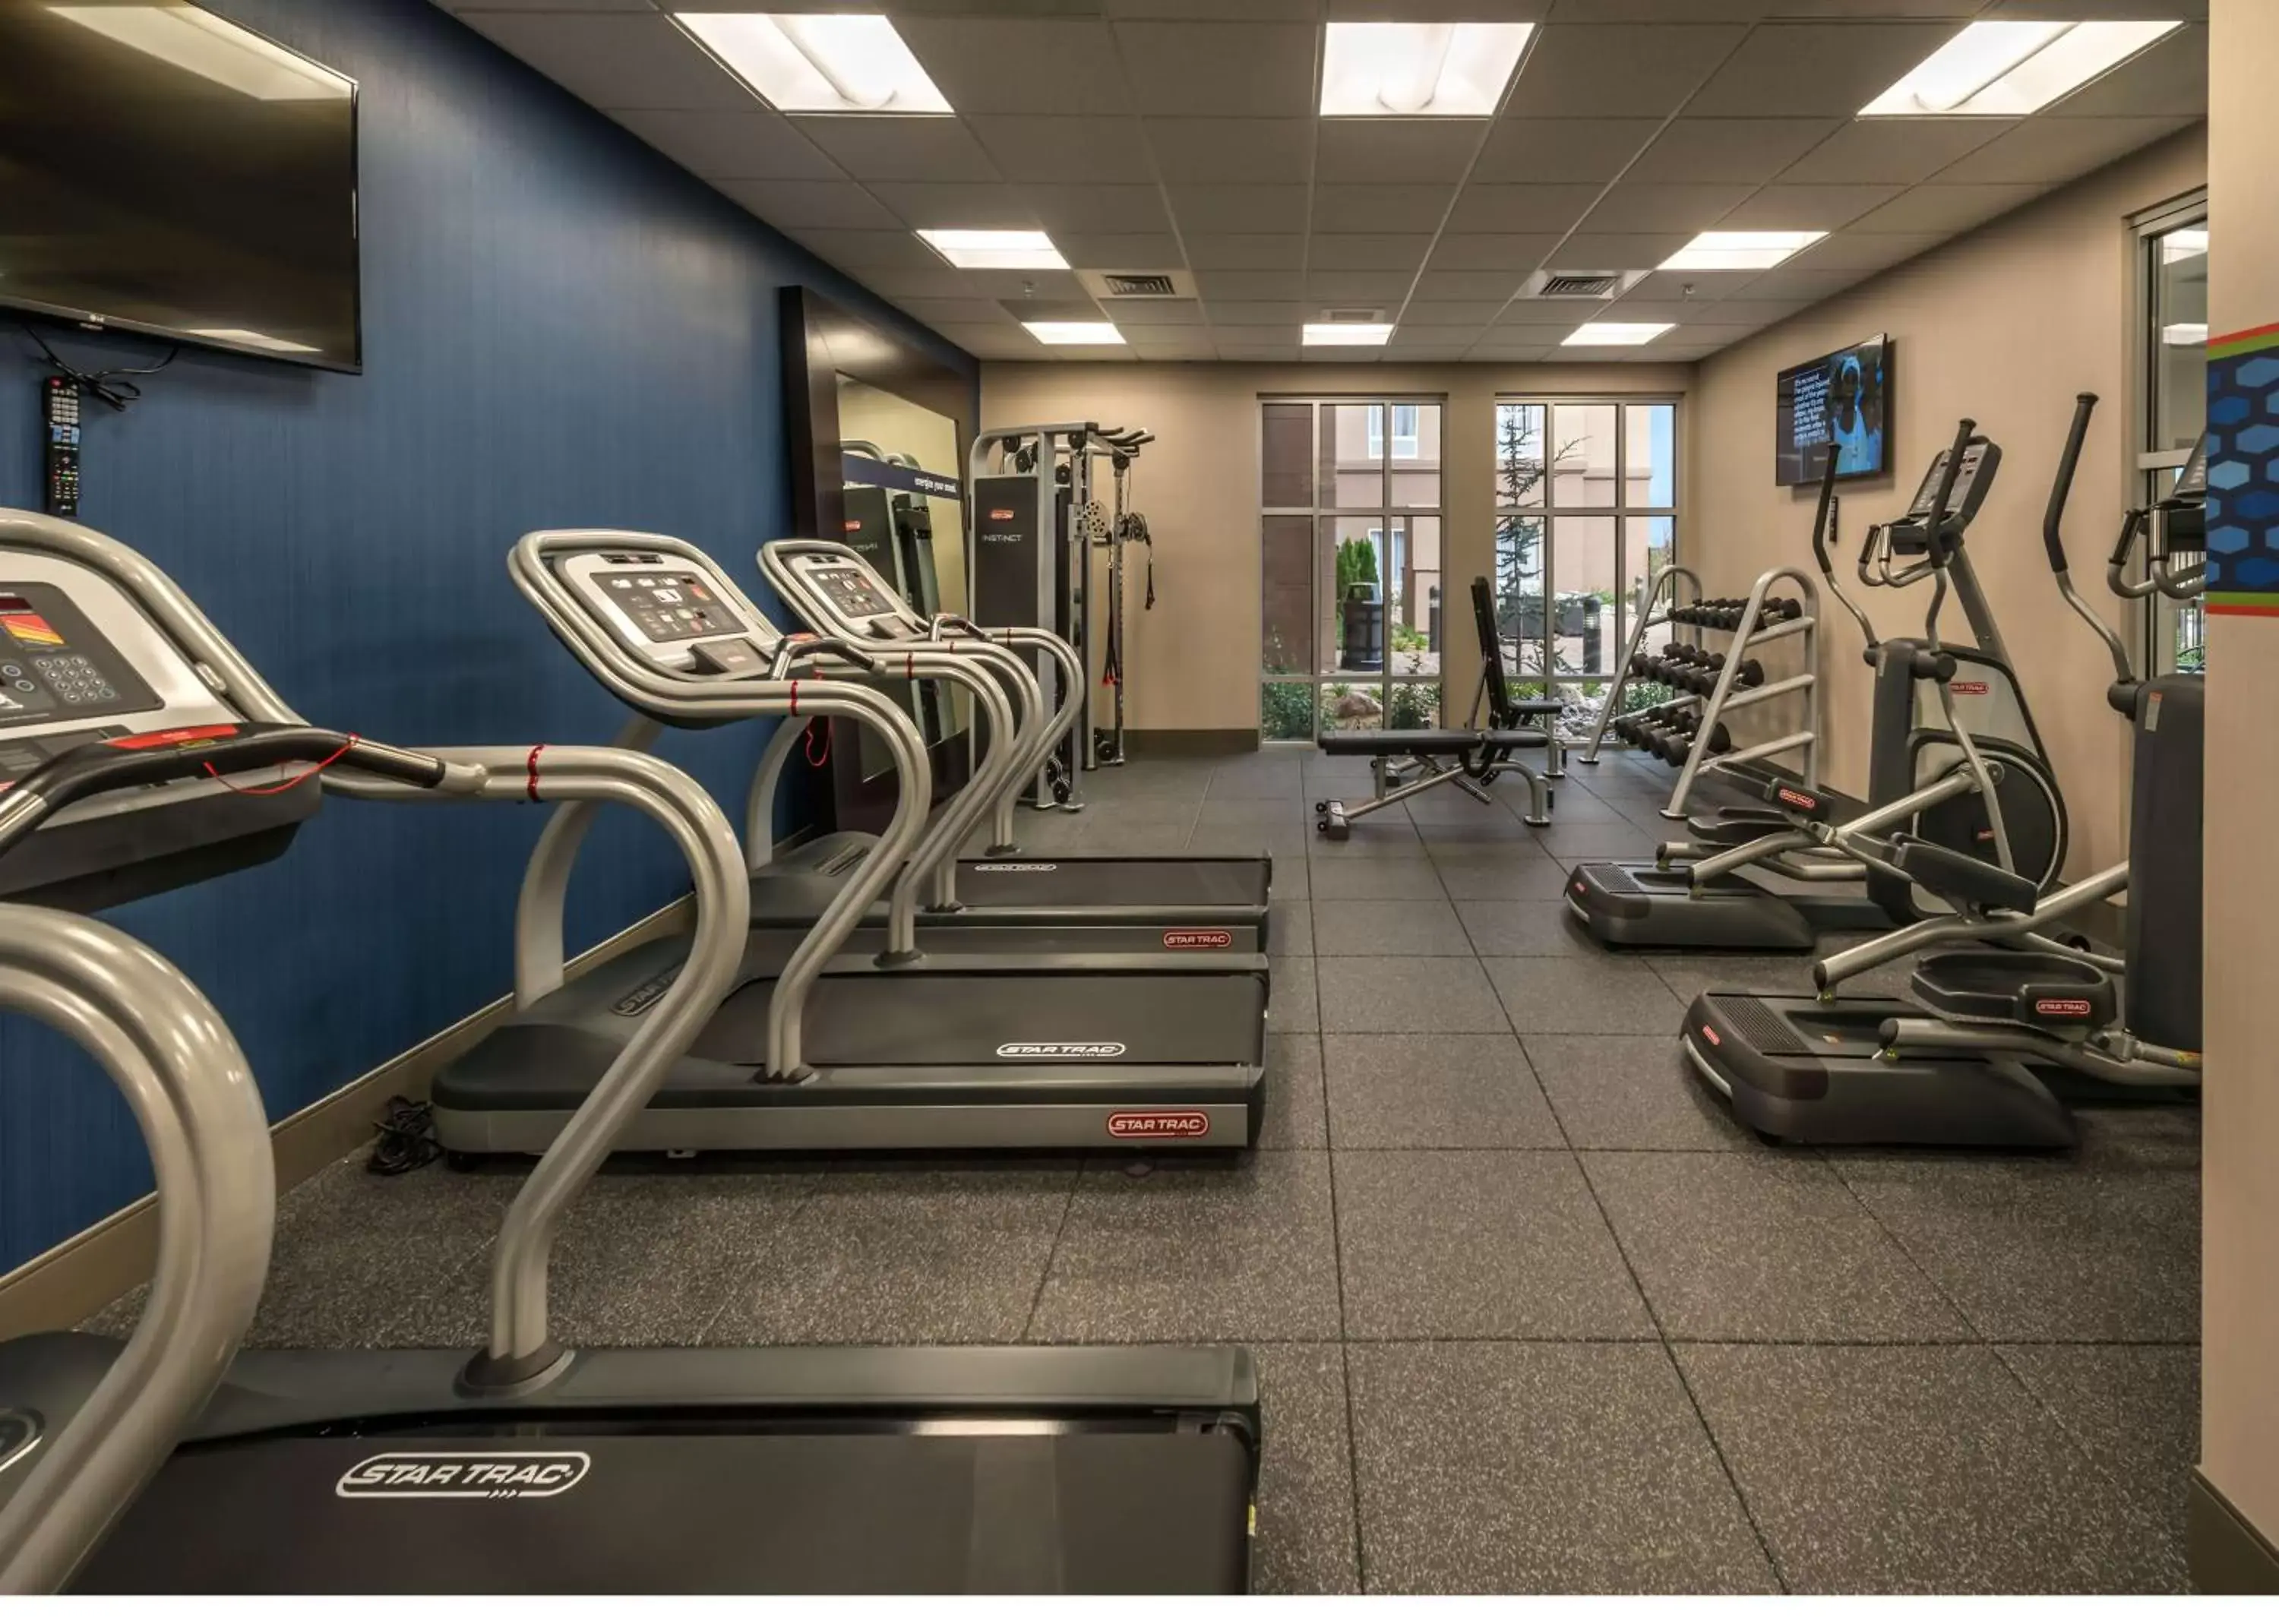 Fitness centre/facilities, Fitness Center/Facilities in Hampton Inn & Suites - Reno West, NV